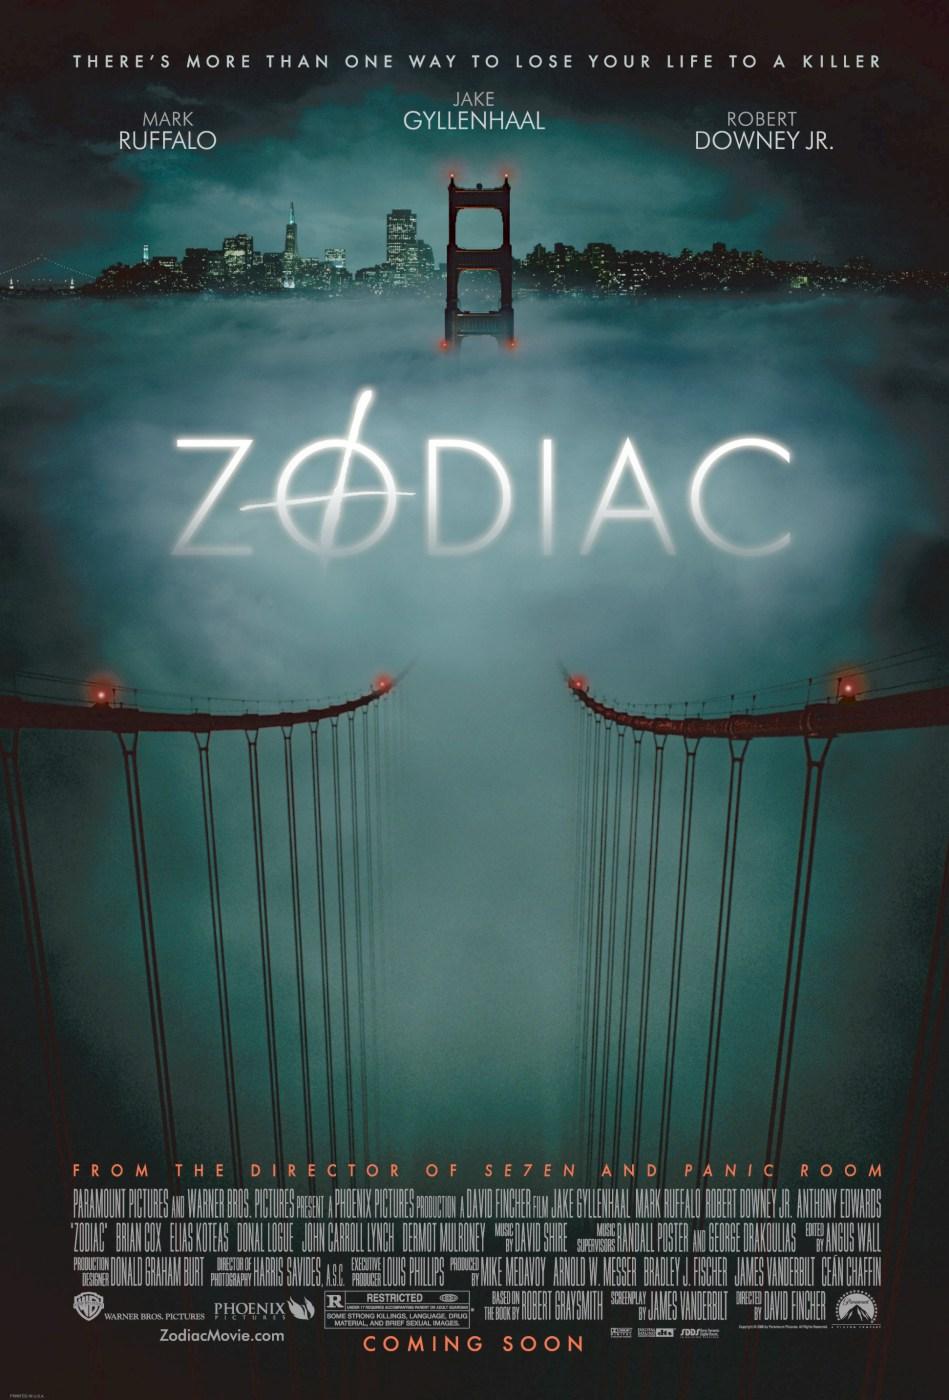 Zodiac Movie Wallpapers - Wallpaper Cave